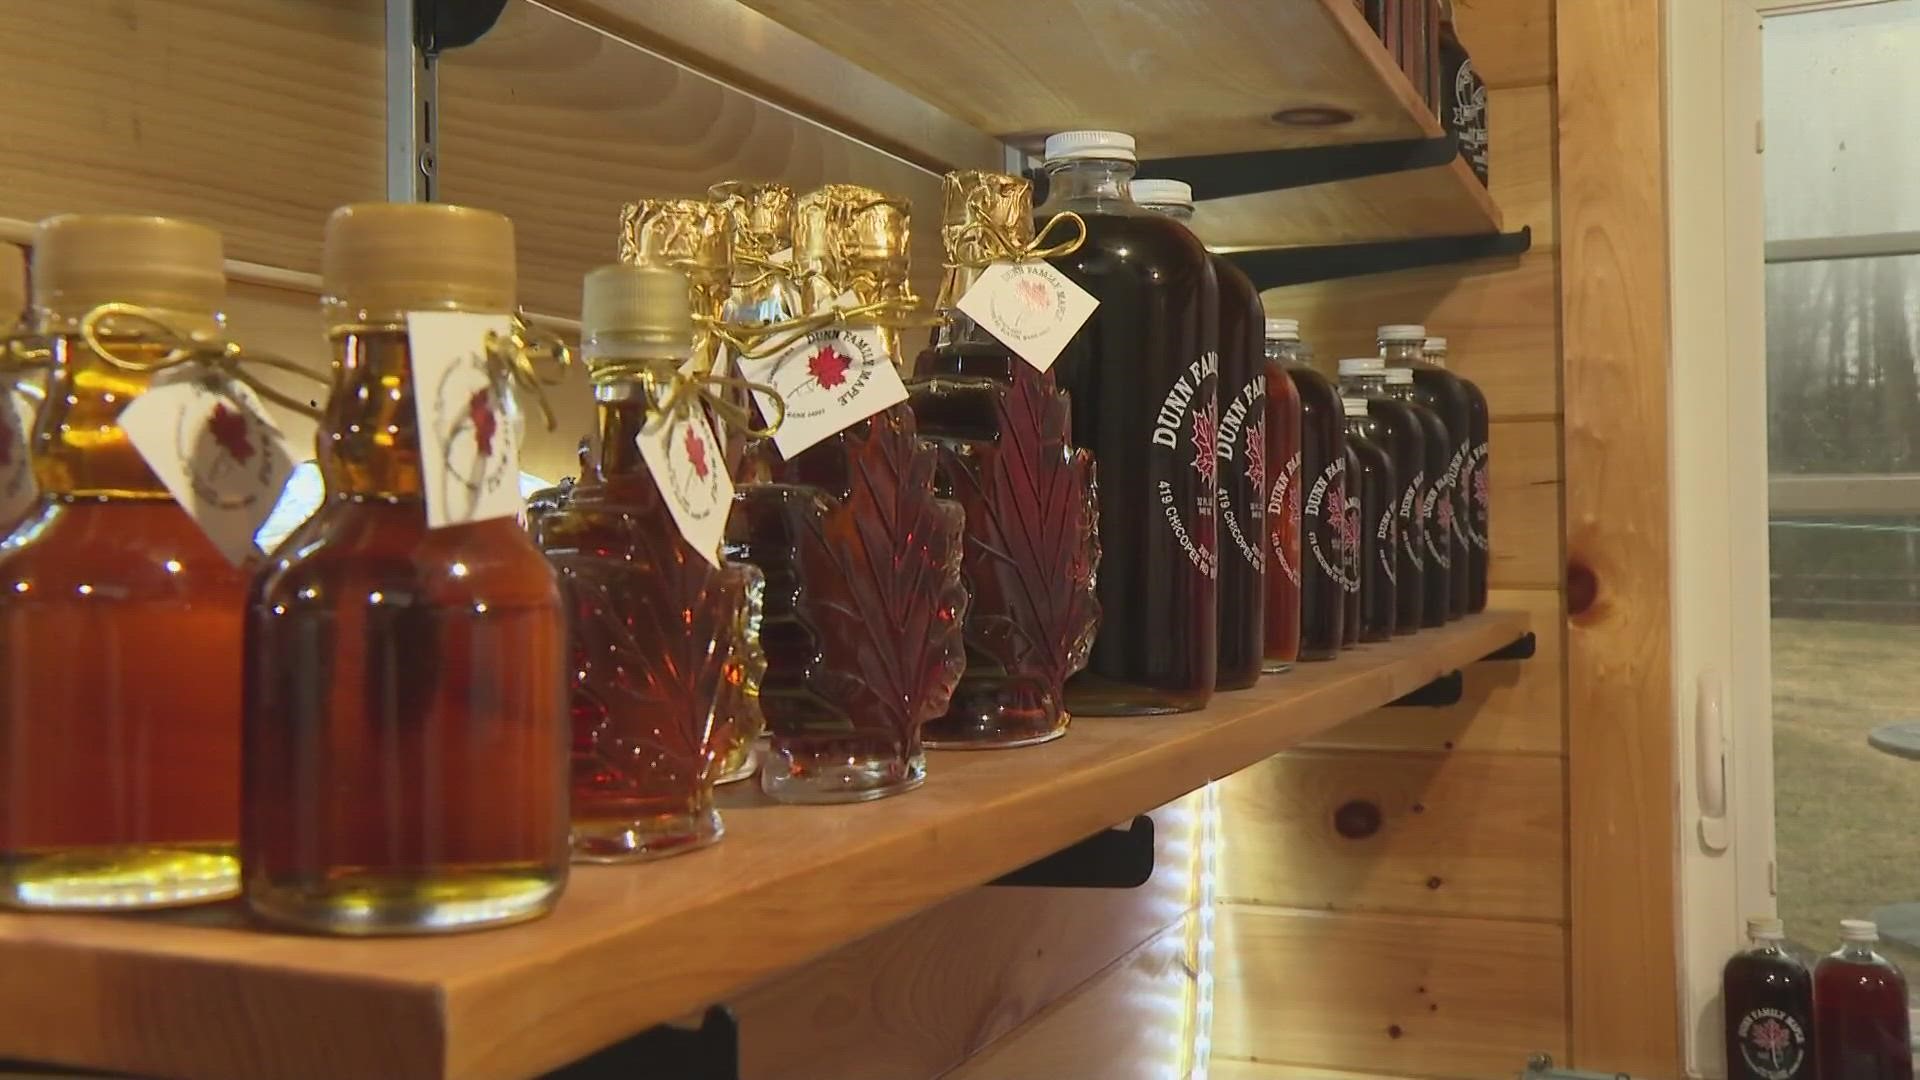 Maine maple producers aren't going to let warmer weather get in the way of celebrating a big year. The 40th Maine Maple Sunday takes place at sugar houses statewide.